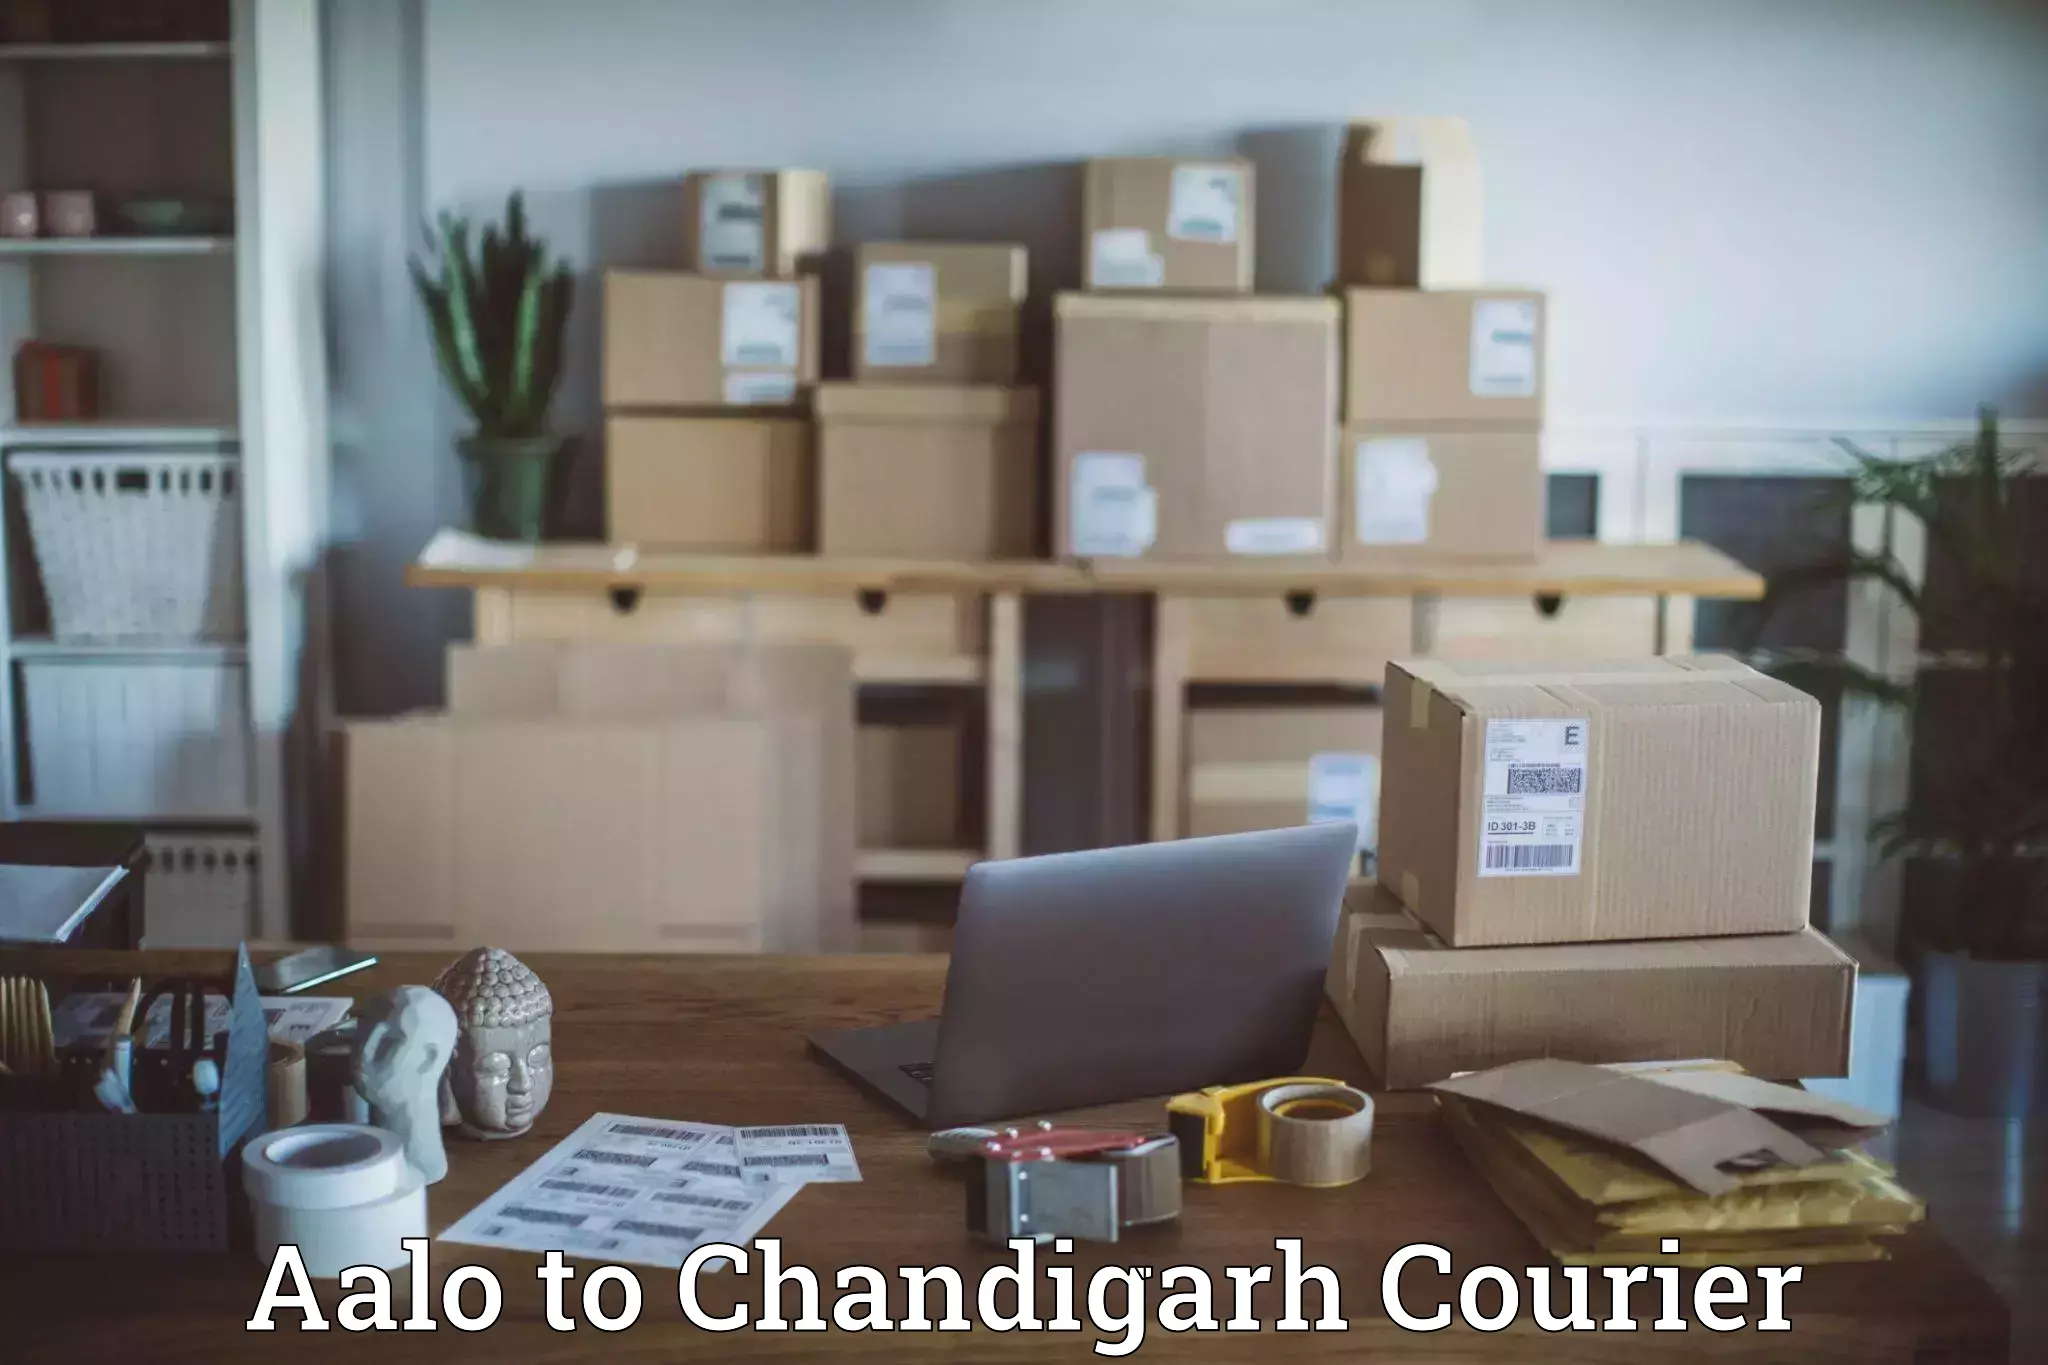 Next day courier Aalo to Chandigarh